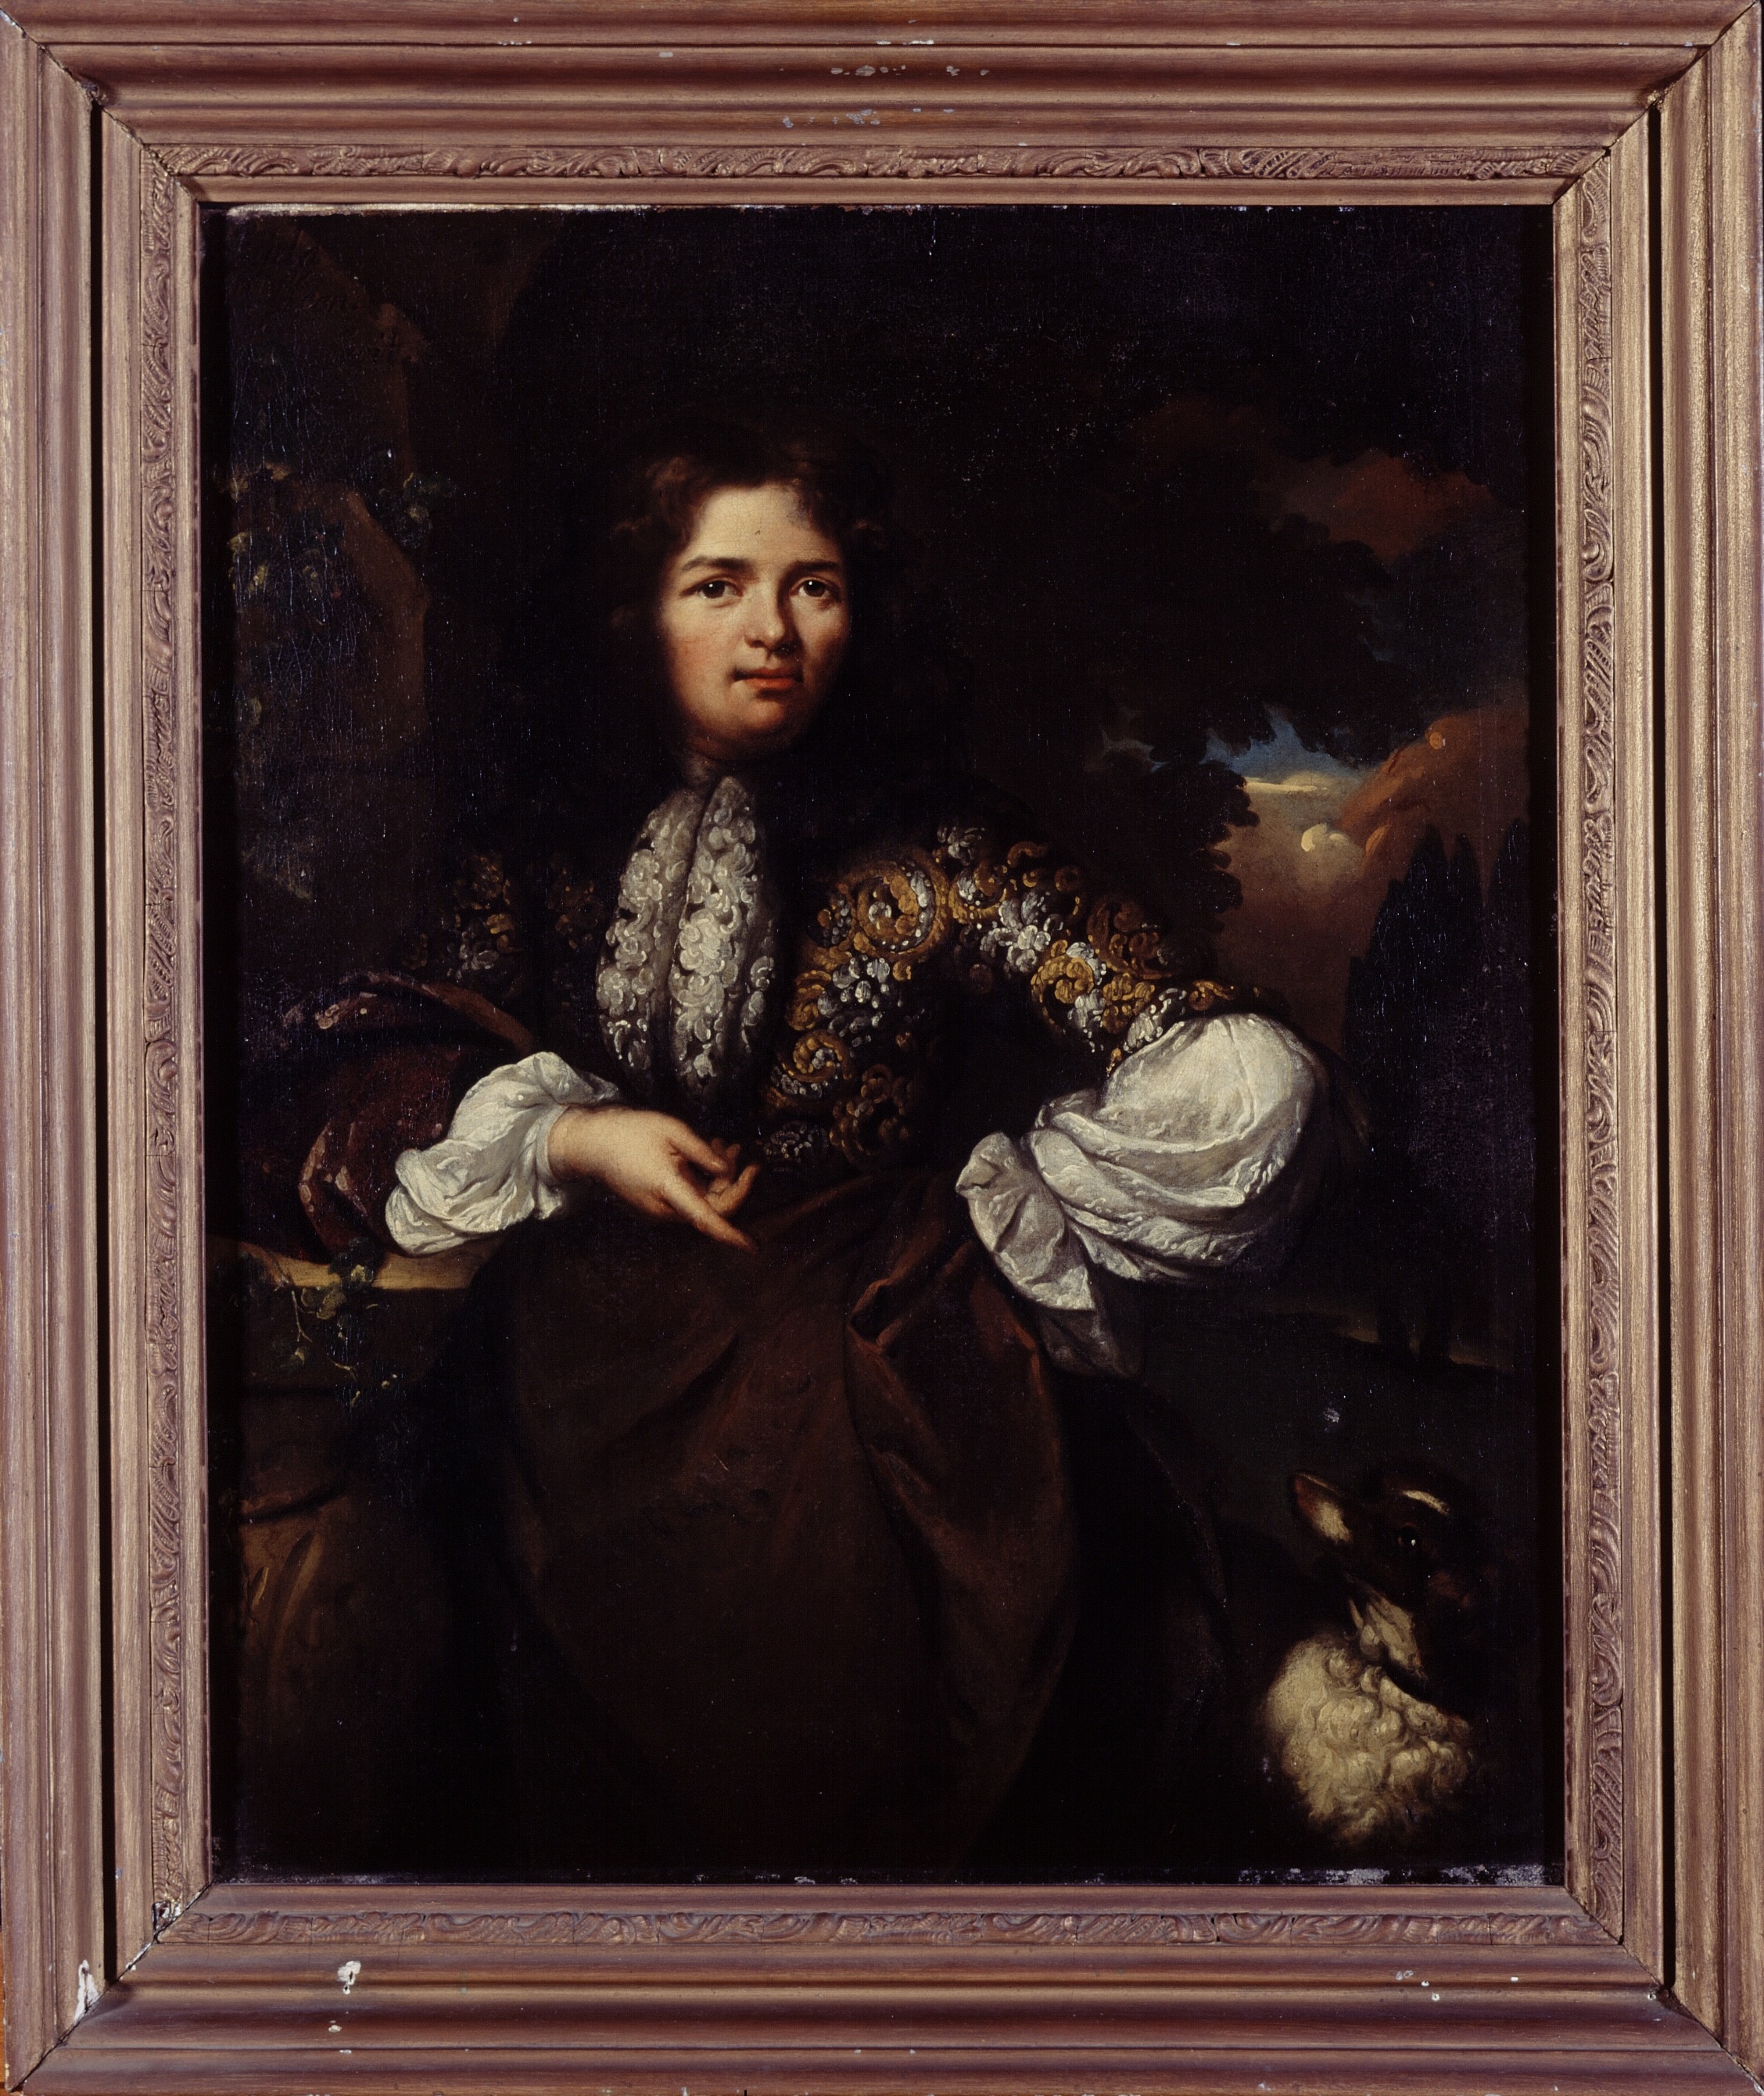 A portrait of a man, elaborately dressed in a seventeenth-century outfit. He is shown at three-quarters length, standing with his right elbow resting on a rock and he looks at the viewer directly with a neutral expression. He rests his left hand at his waist, jutting out his left elbow.  